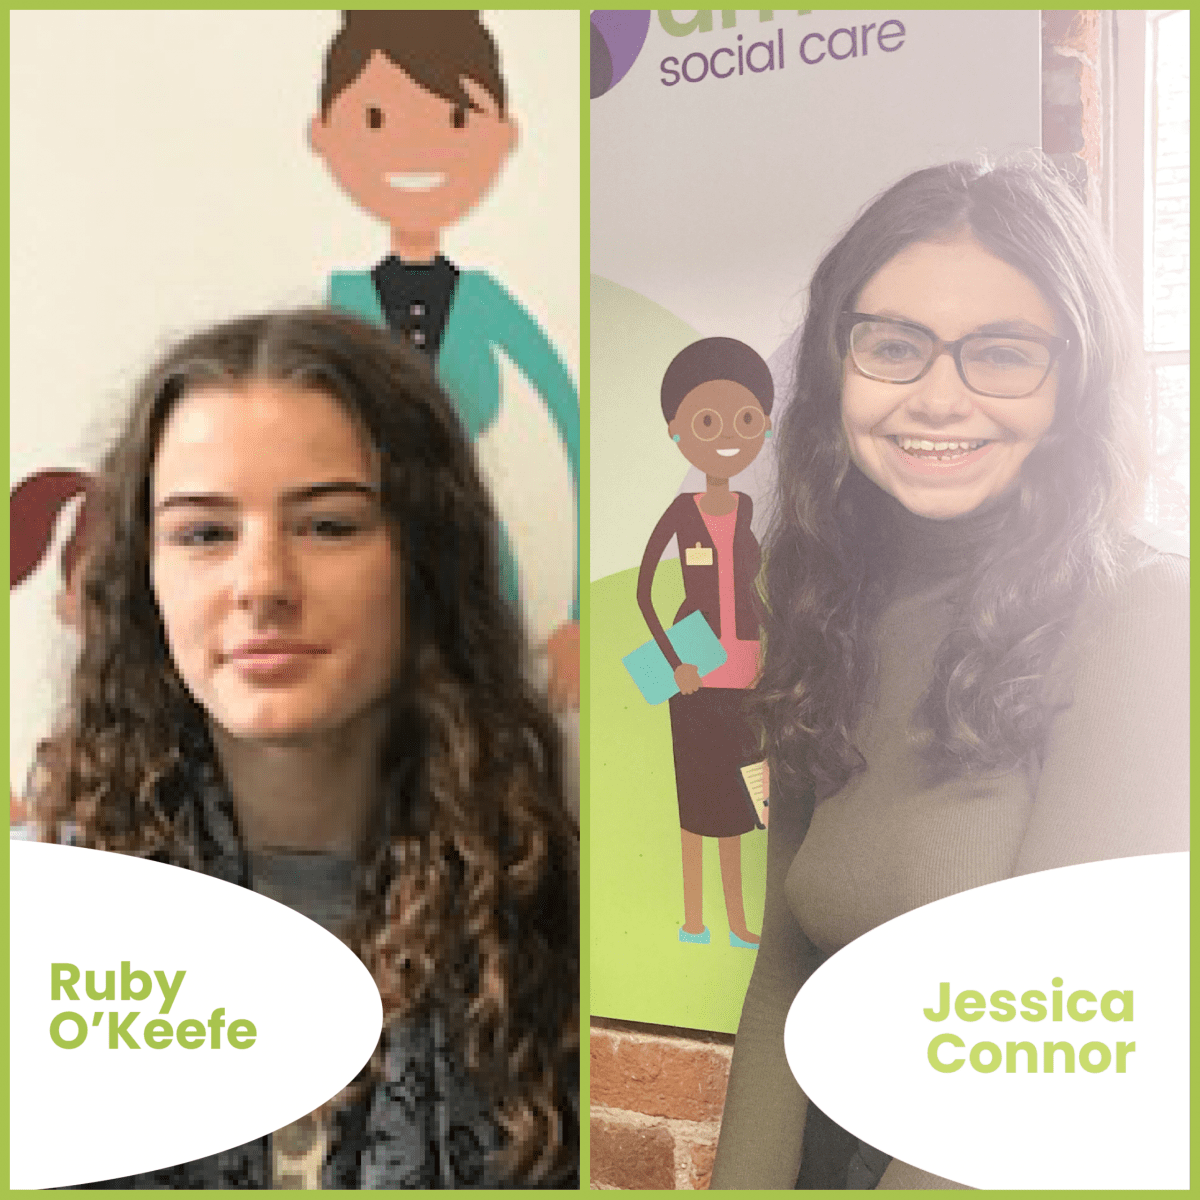 Welcome to the team Jess and Ruby!